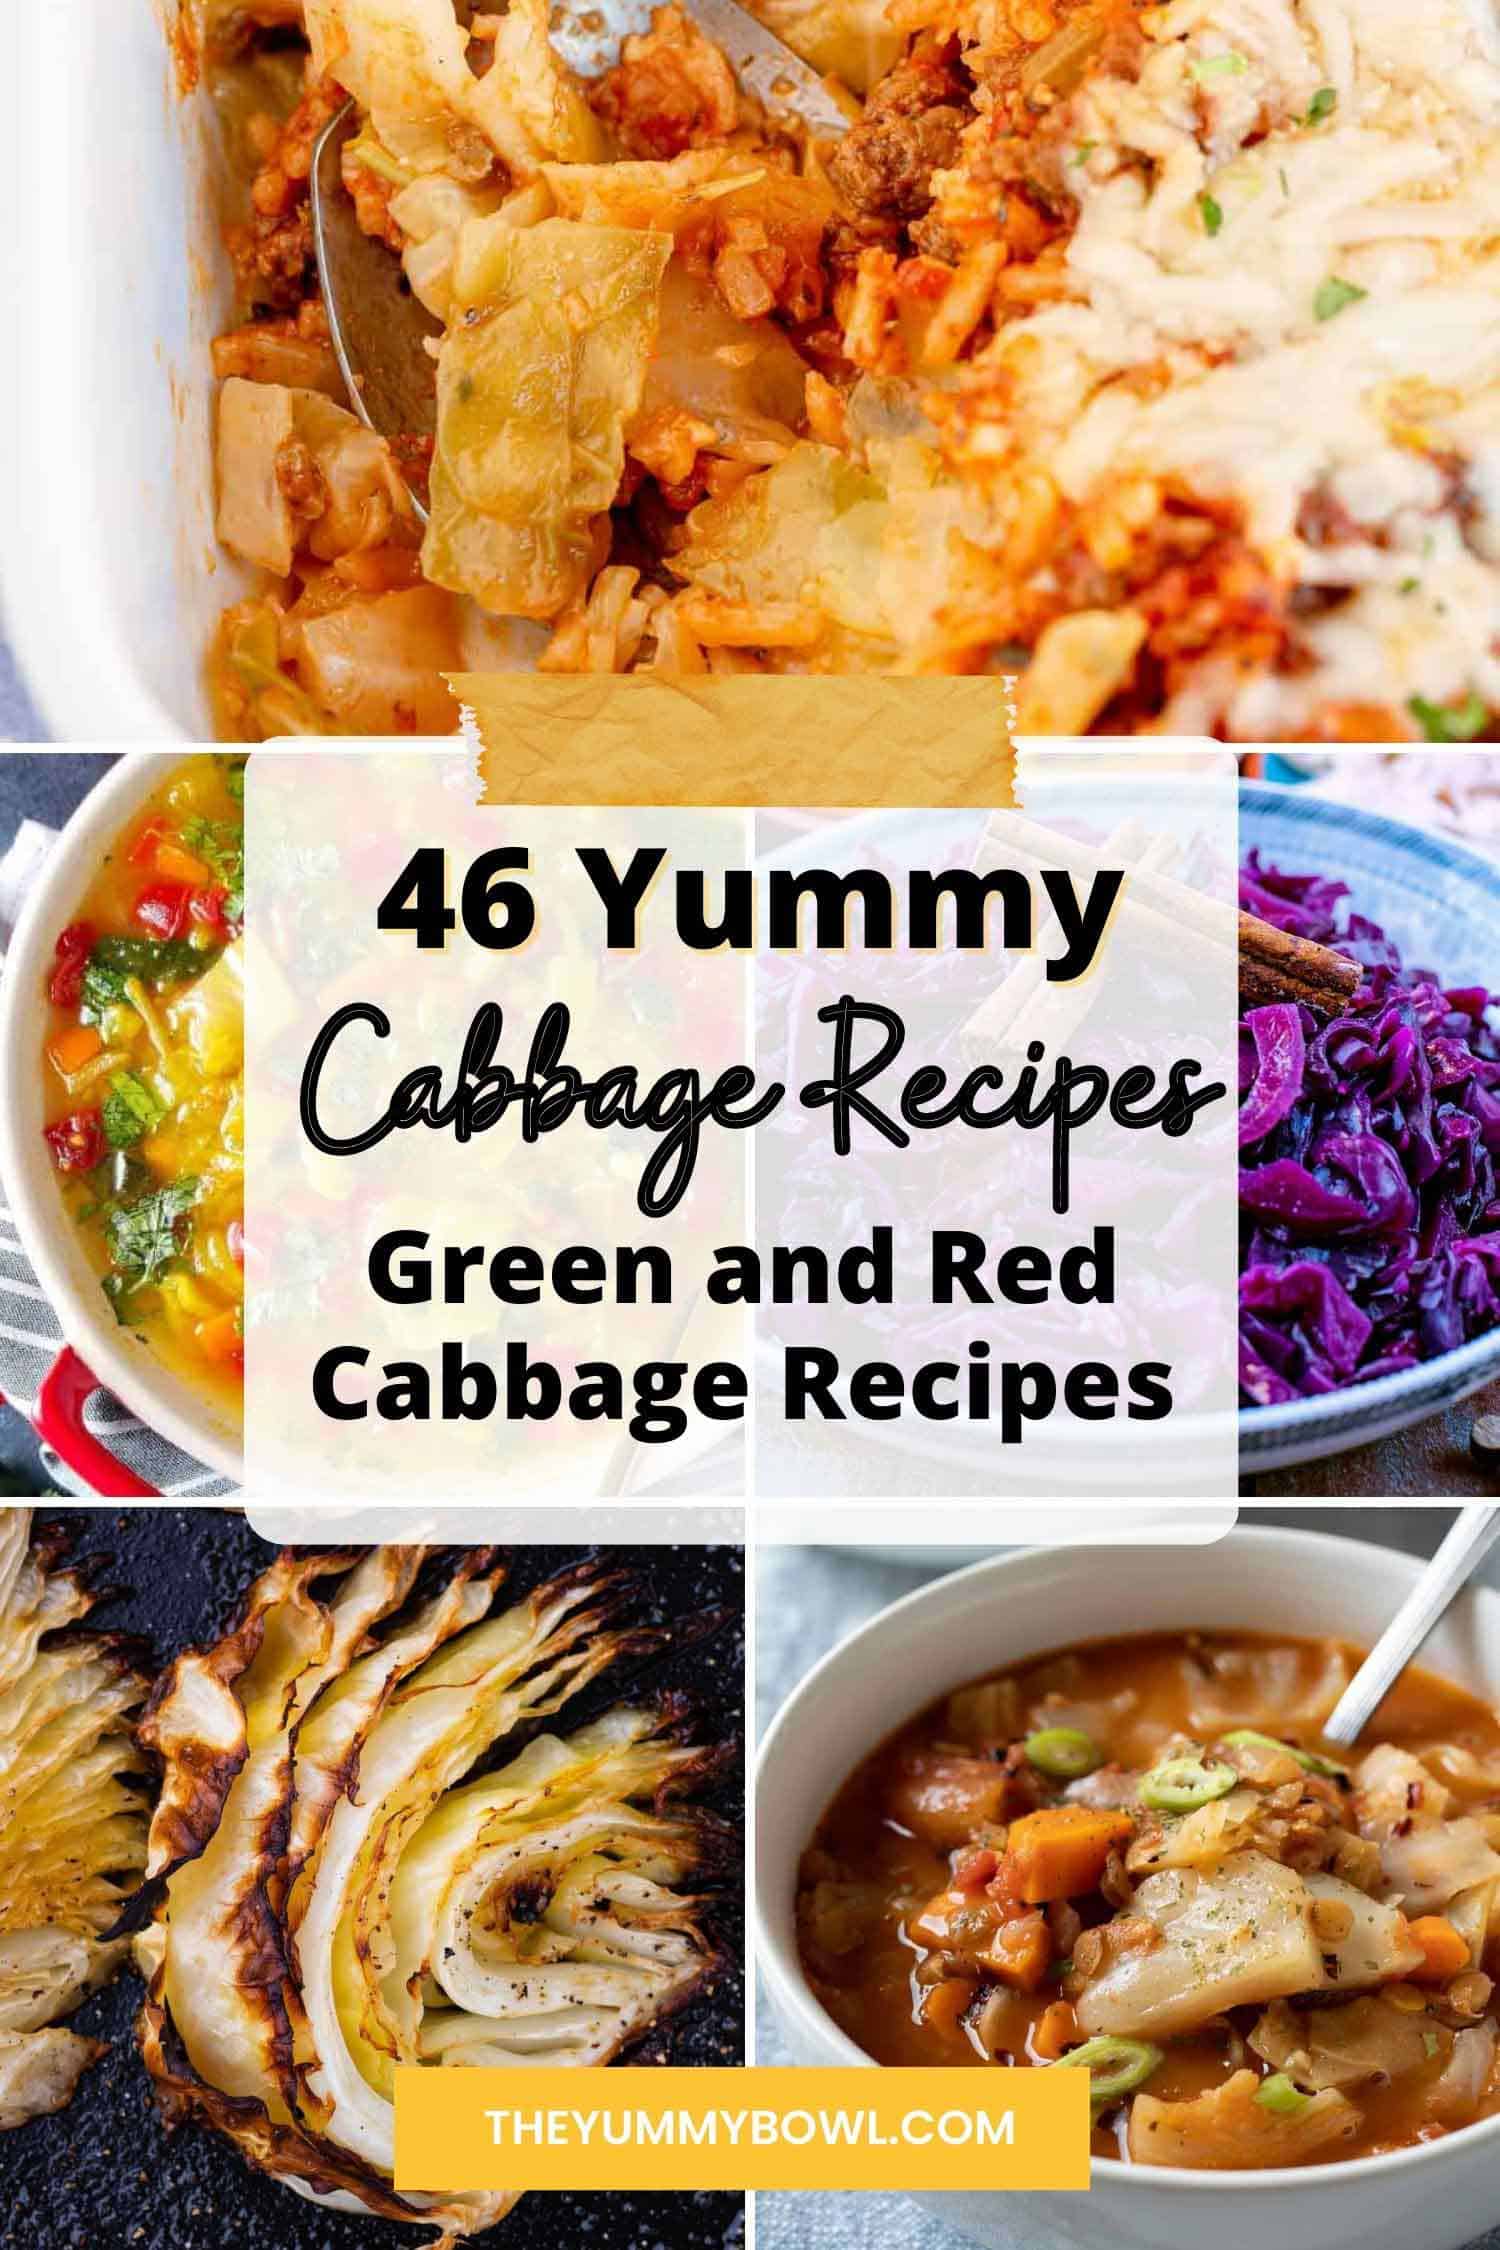 Best Cabbage Recipes Roundup - The Yummy Bowl